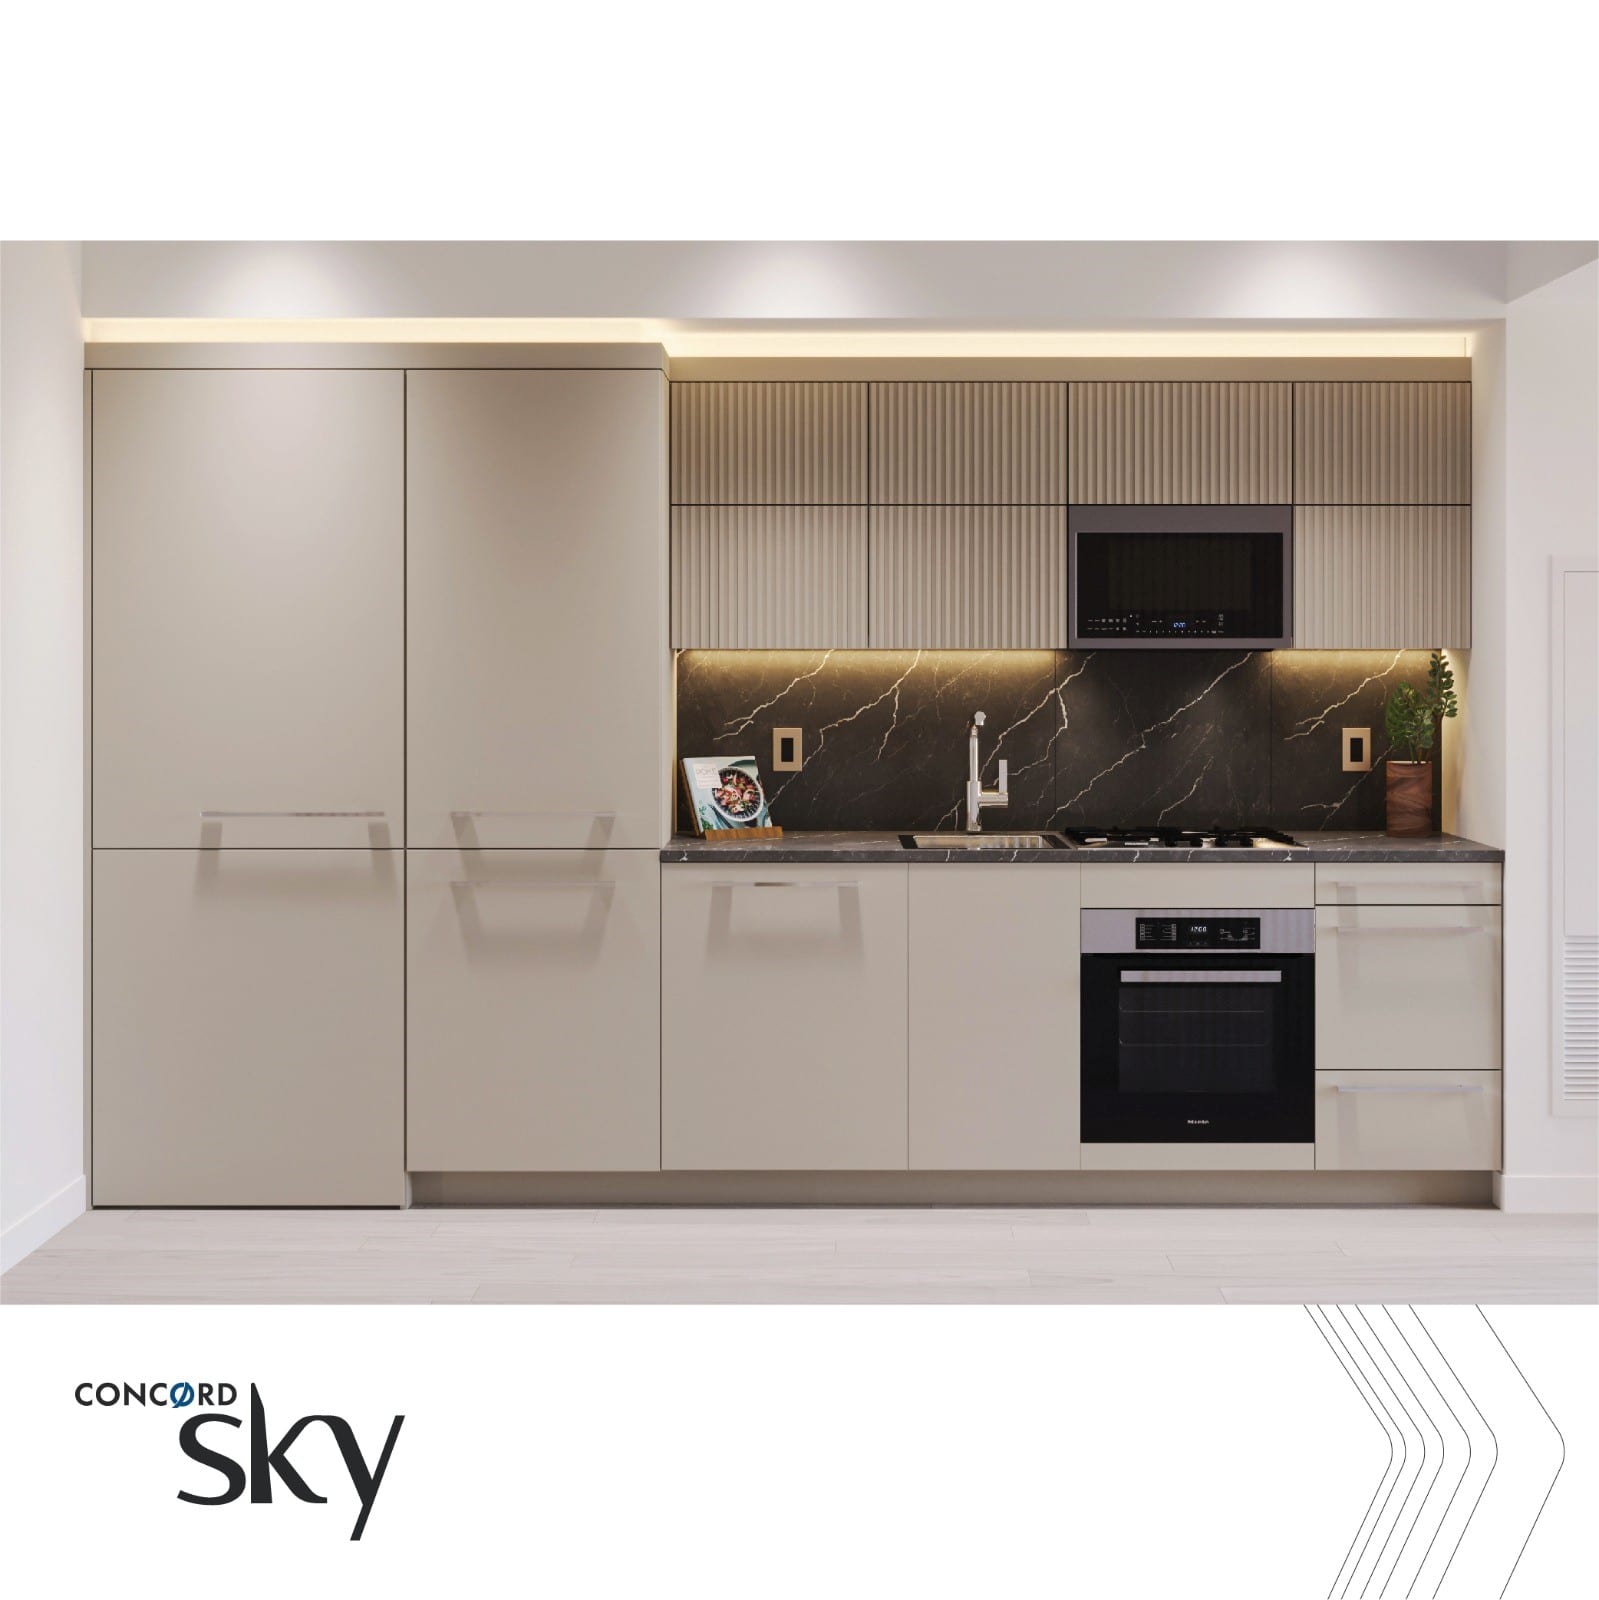 Rendering of Concord Sky Condos suite kitchen light